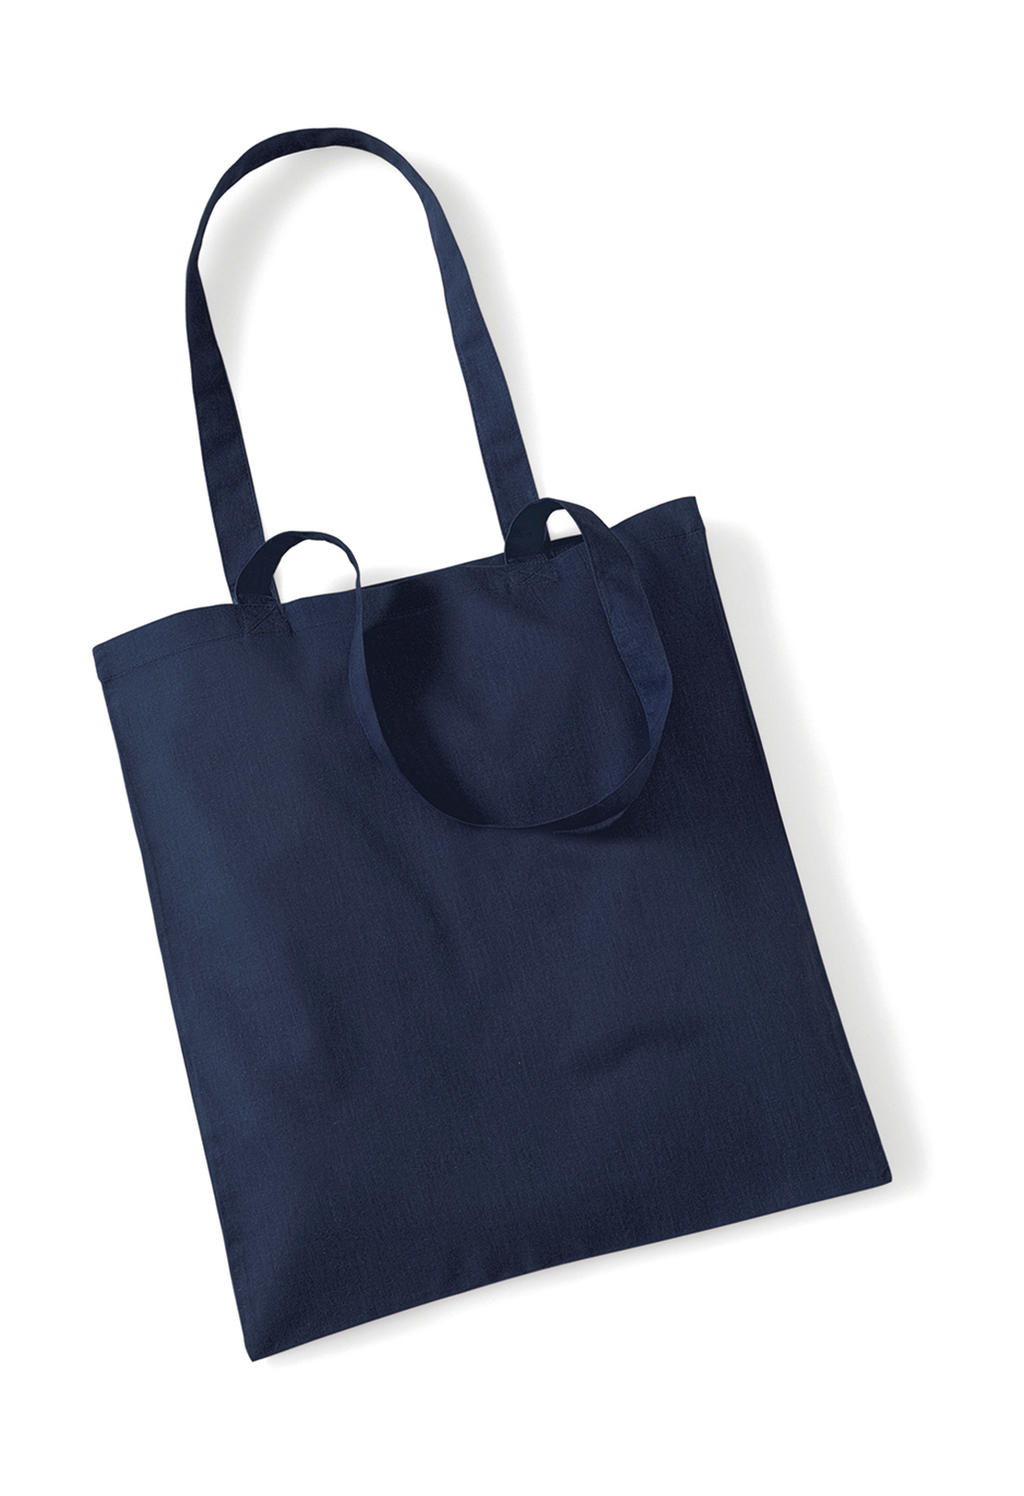  Bag for Life - Long Handles in Farbe French Navy